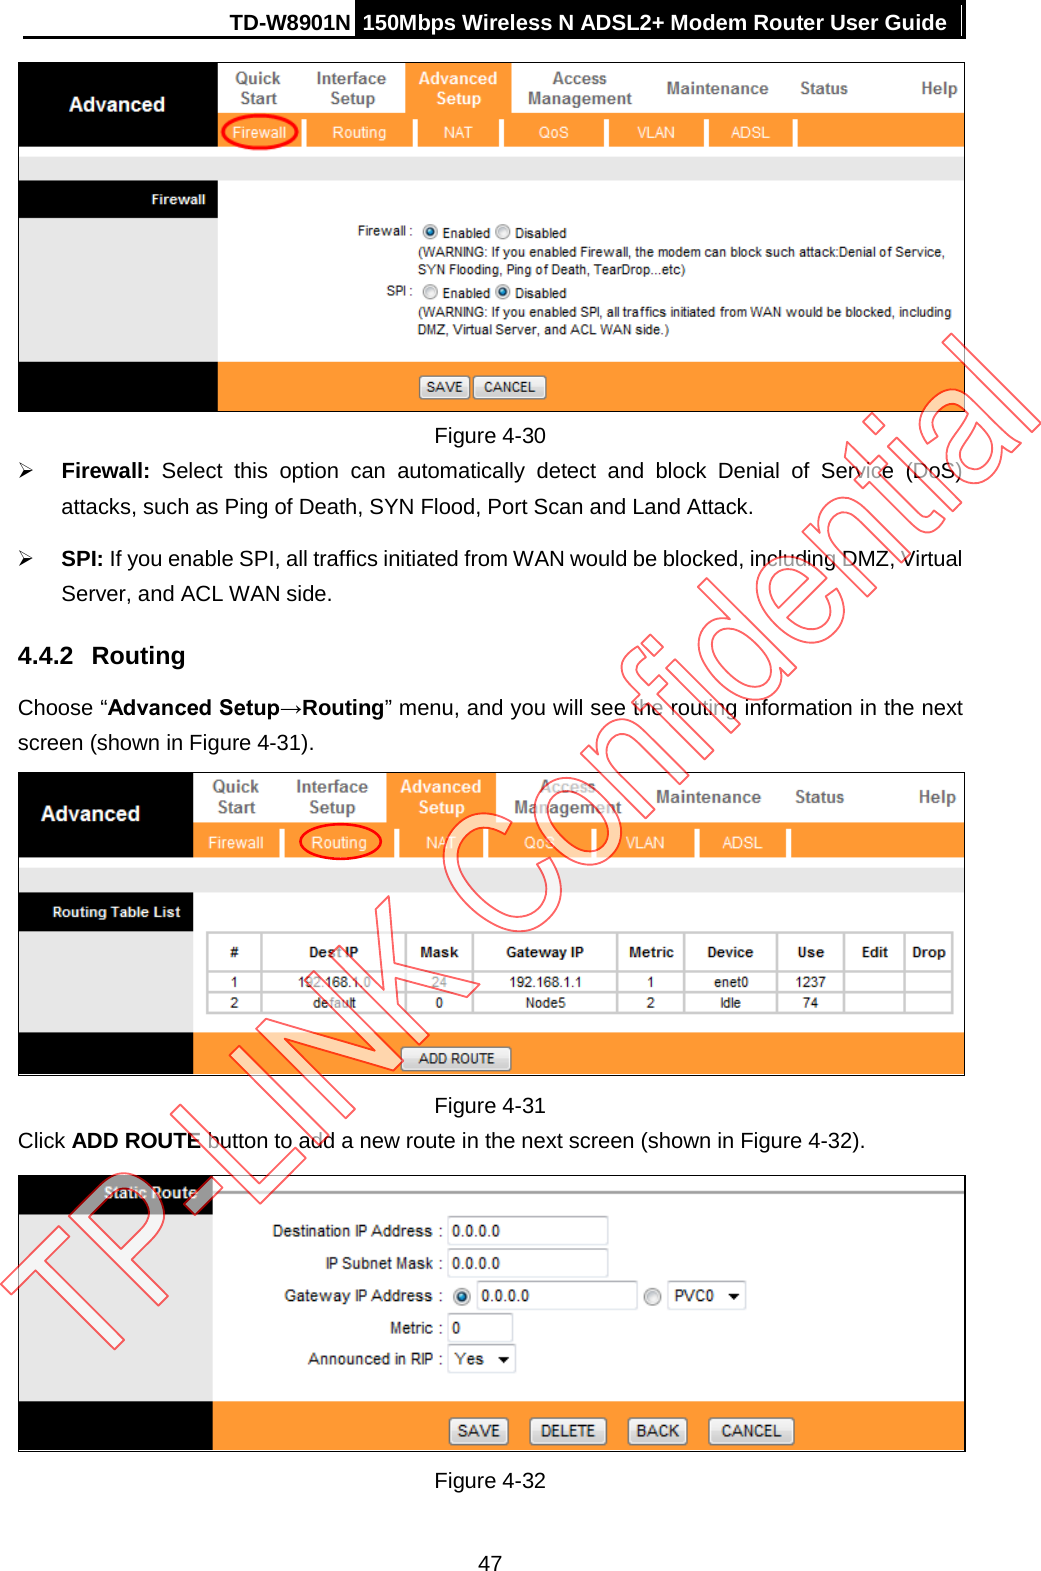 TD-W8901N 150Mbps Wireless N ADSL2+ Modem Router User Guide   Figure 4-30  Firewall:  Select this option can automatically detect and block Denial of Service (DoS) attacks, such as Ping of Death, SYN Flood, Port Scan and Land Attack.  SPI: If you enable SPI, all traffics initiated from WAN would be blocked, including DMZ, Virtual Server, and ACL WAN side. 4.4.2 Routing Choose “Advanced Setup→Routing” menu, and you will see the routing information in the next screen (shown in Figure 4-31).  Figure 4-31 Click ADD ROUTE button to add a new route in the next screen (shown in Figure 4-32).  Figure 4-32 47 